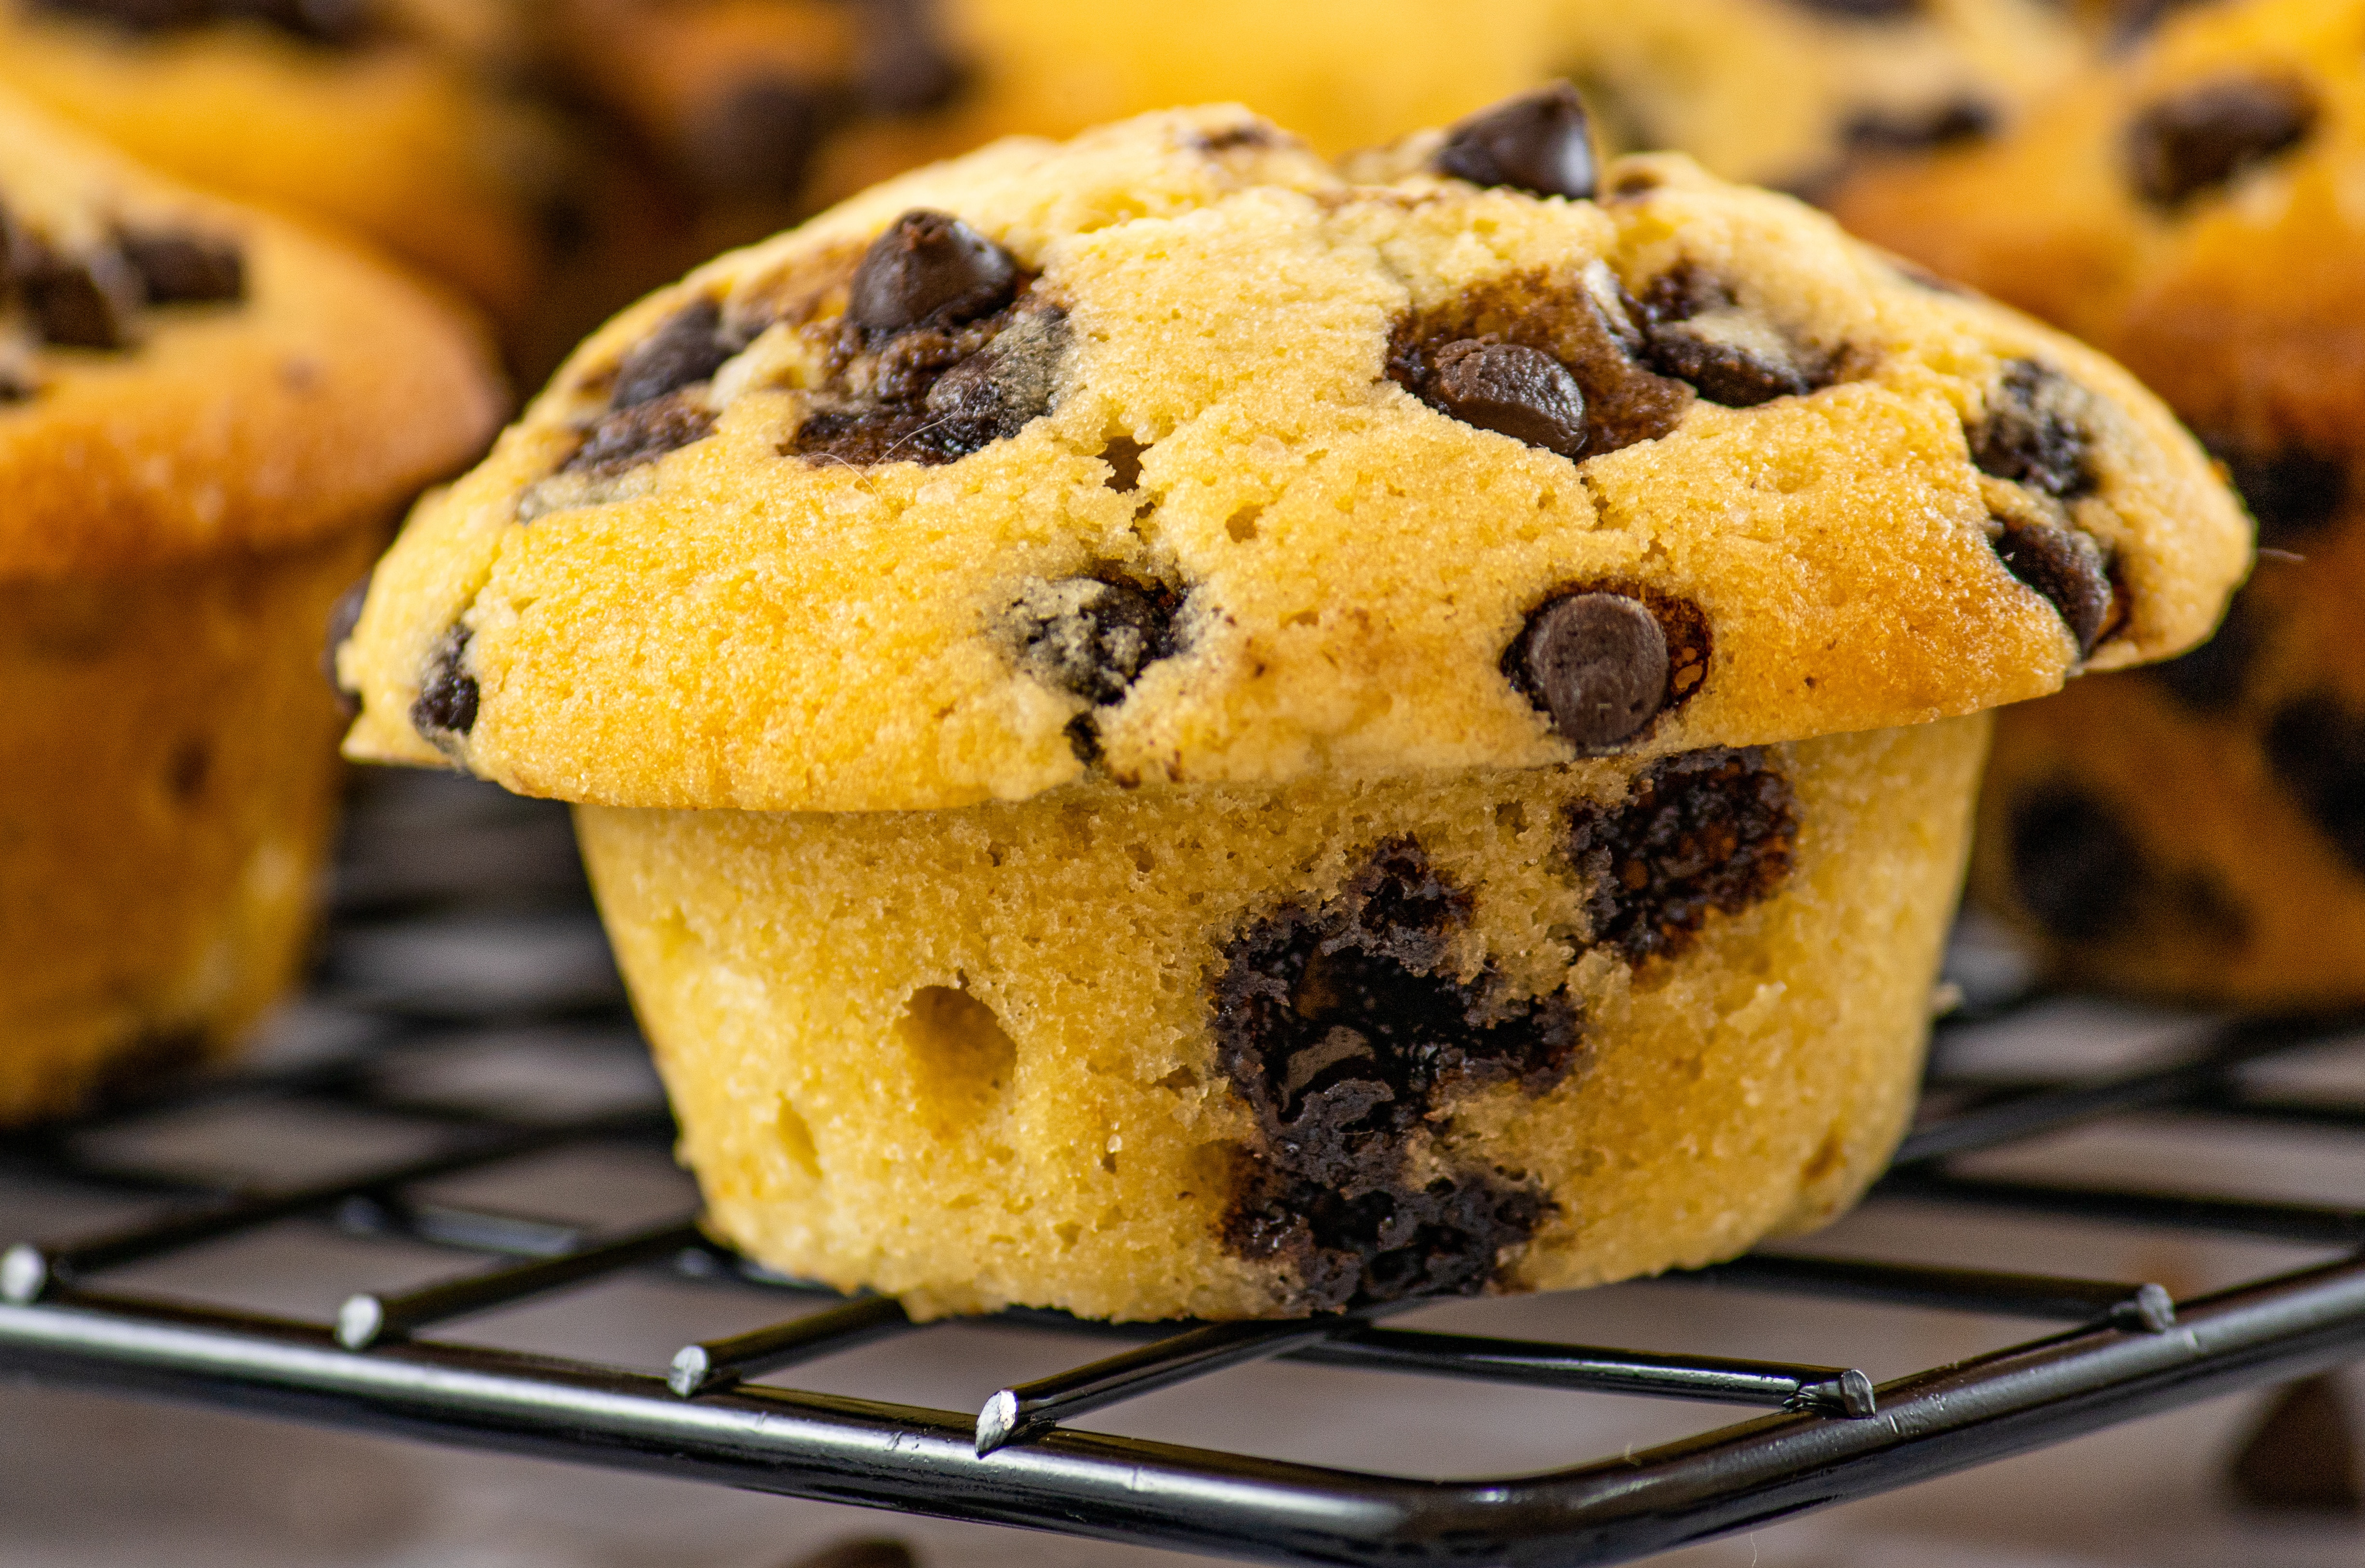 A mini muffin filled with chocolate chips resting on a baking rack.